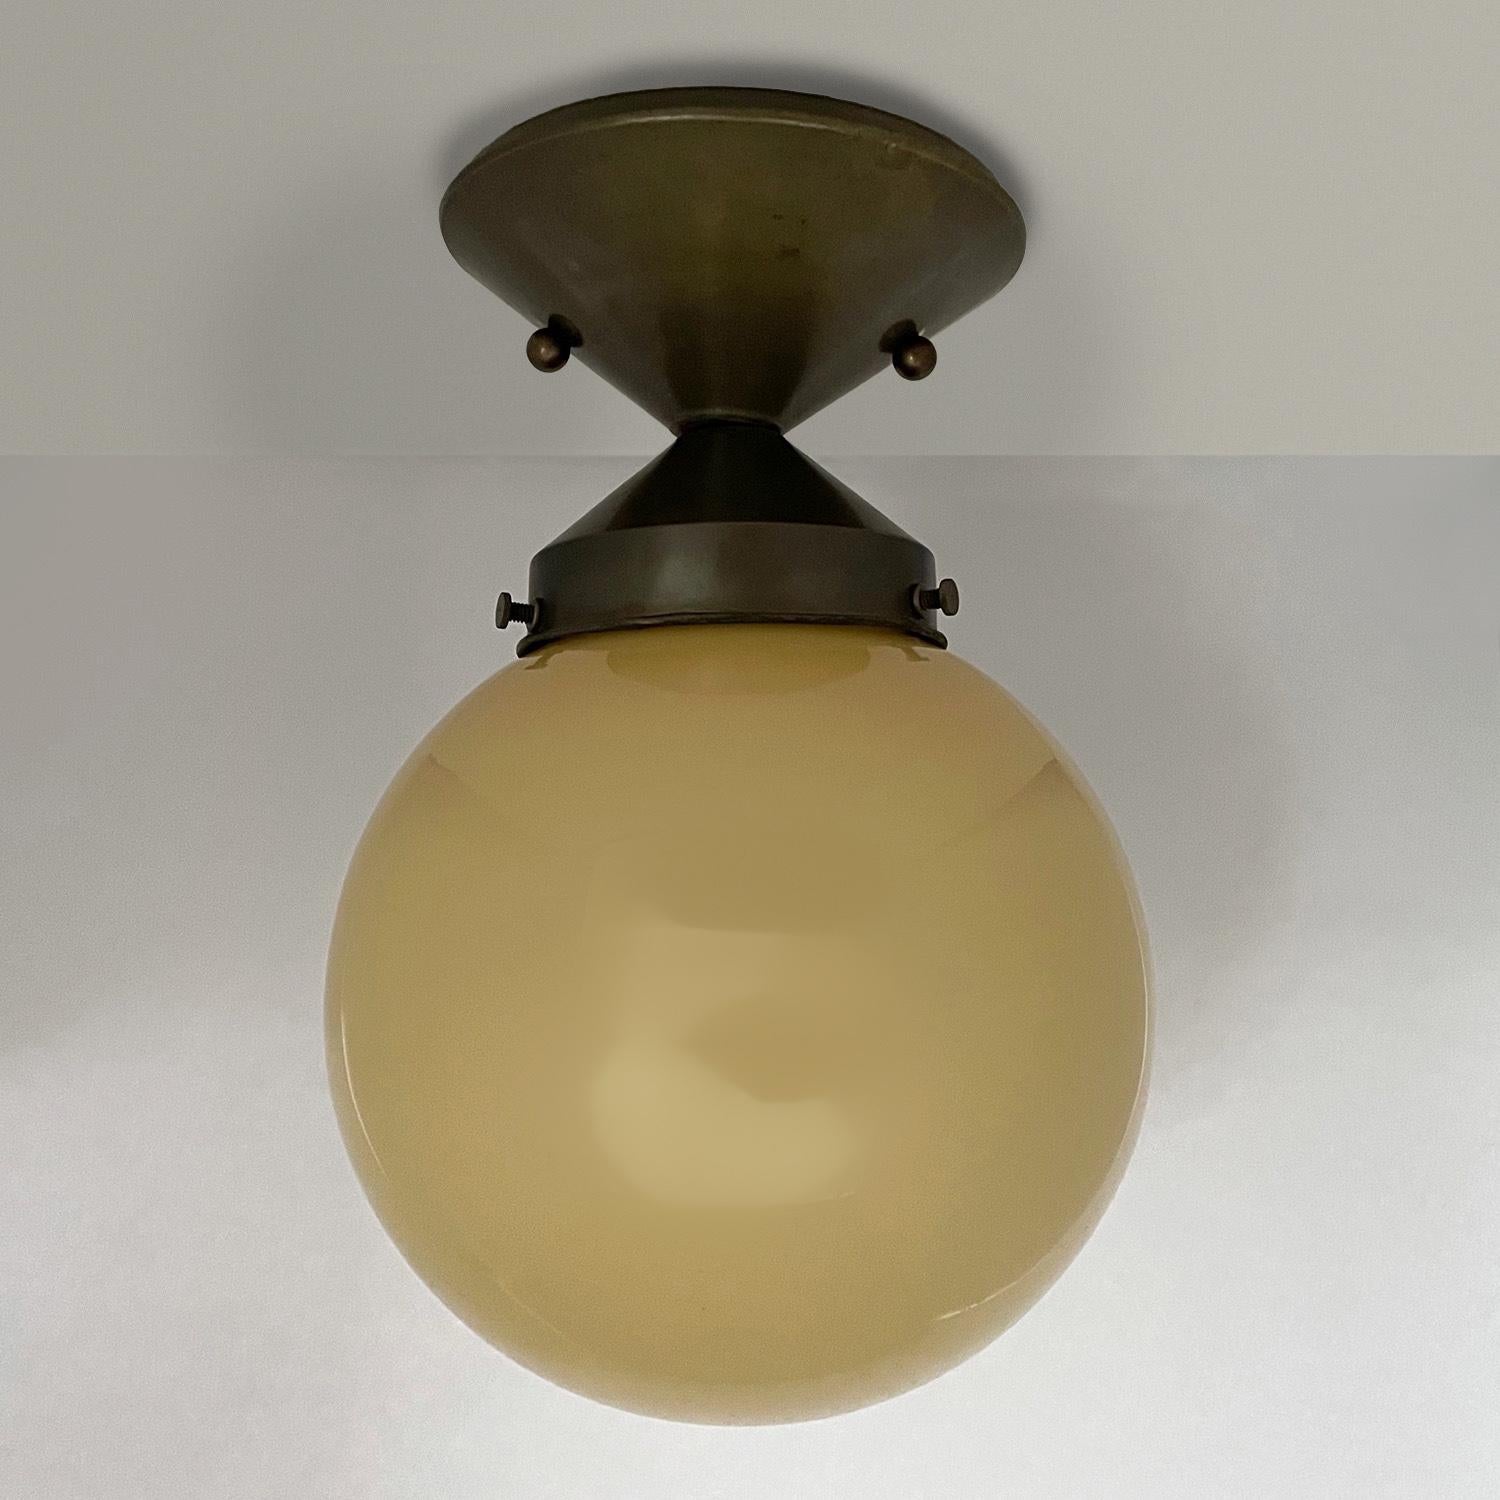 Petite French globe light
France, circa 1940s
This is a charming light fixture
Pale mustard glass globe
Bronzed conical base has light surface markings
Patina from age and use
Newly rewired single base medium bulb
Canopy has been upgraded to